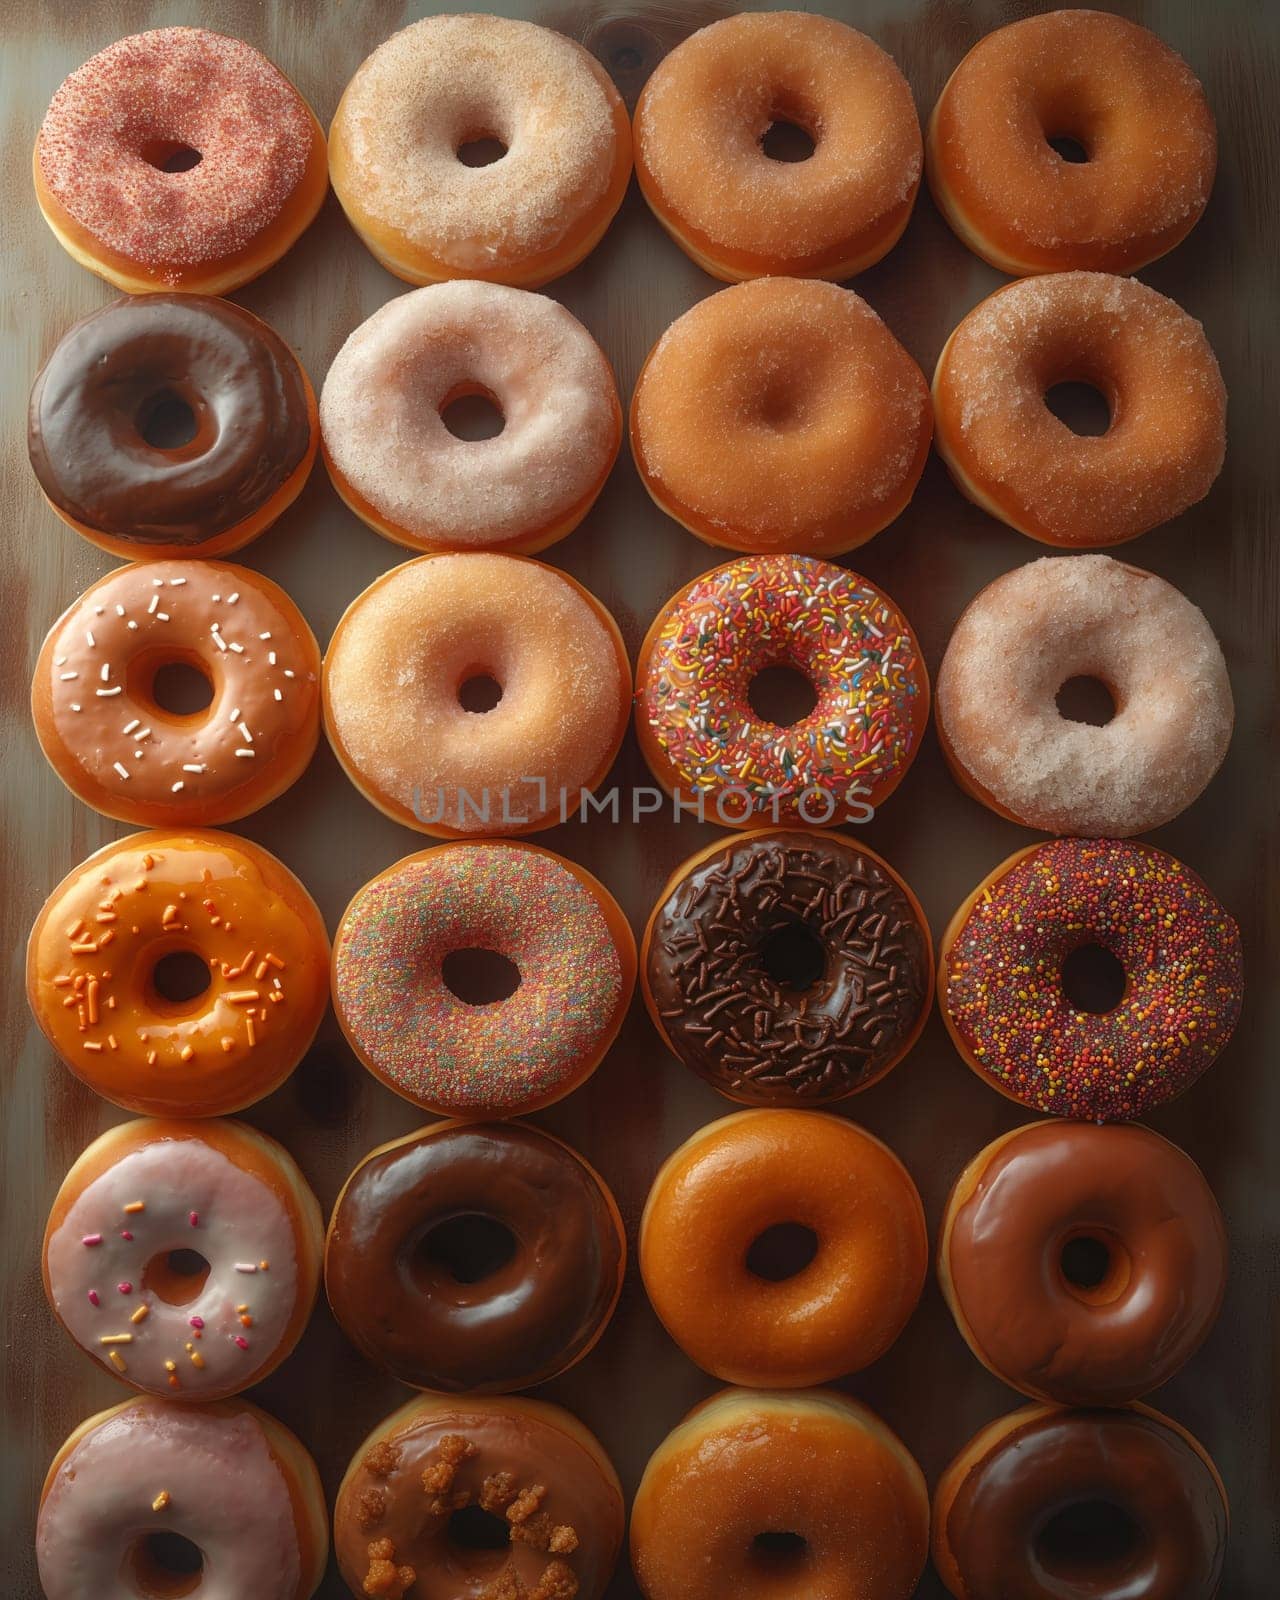 An assortment of delicious donuts on the table. by Fischeron